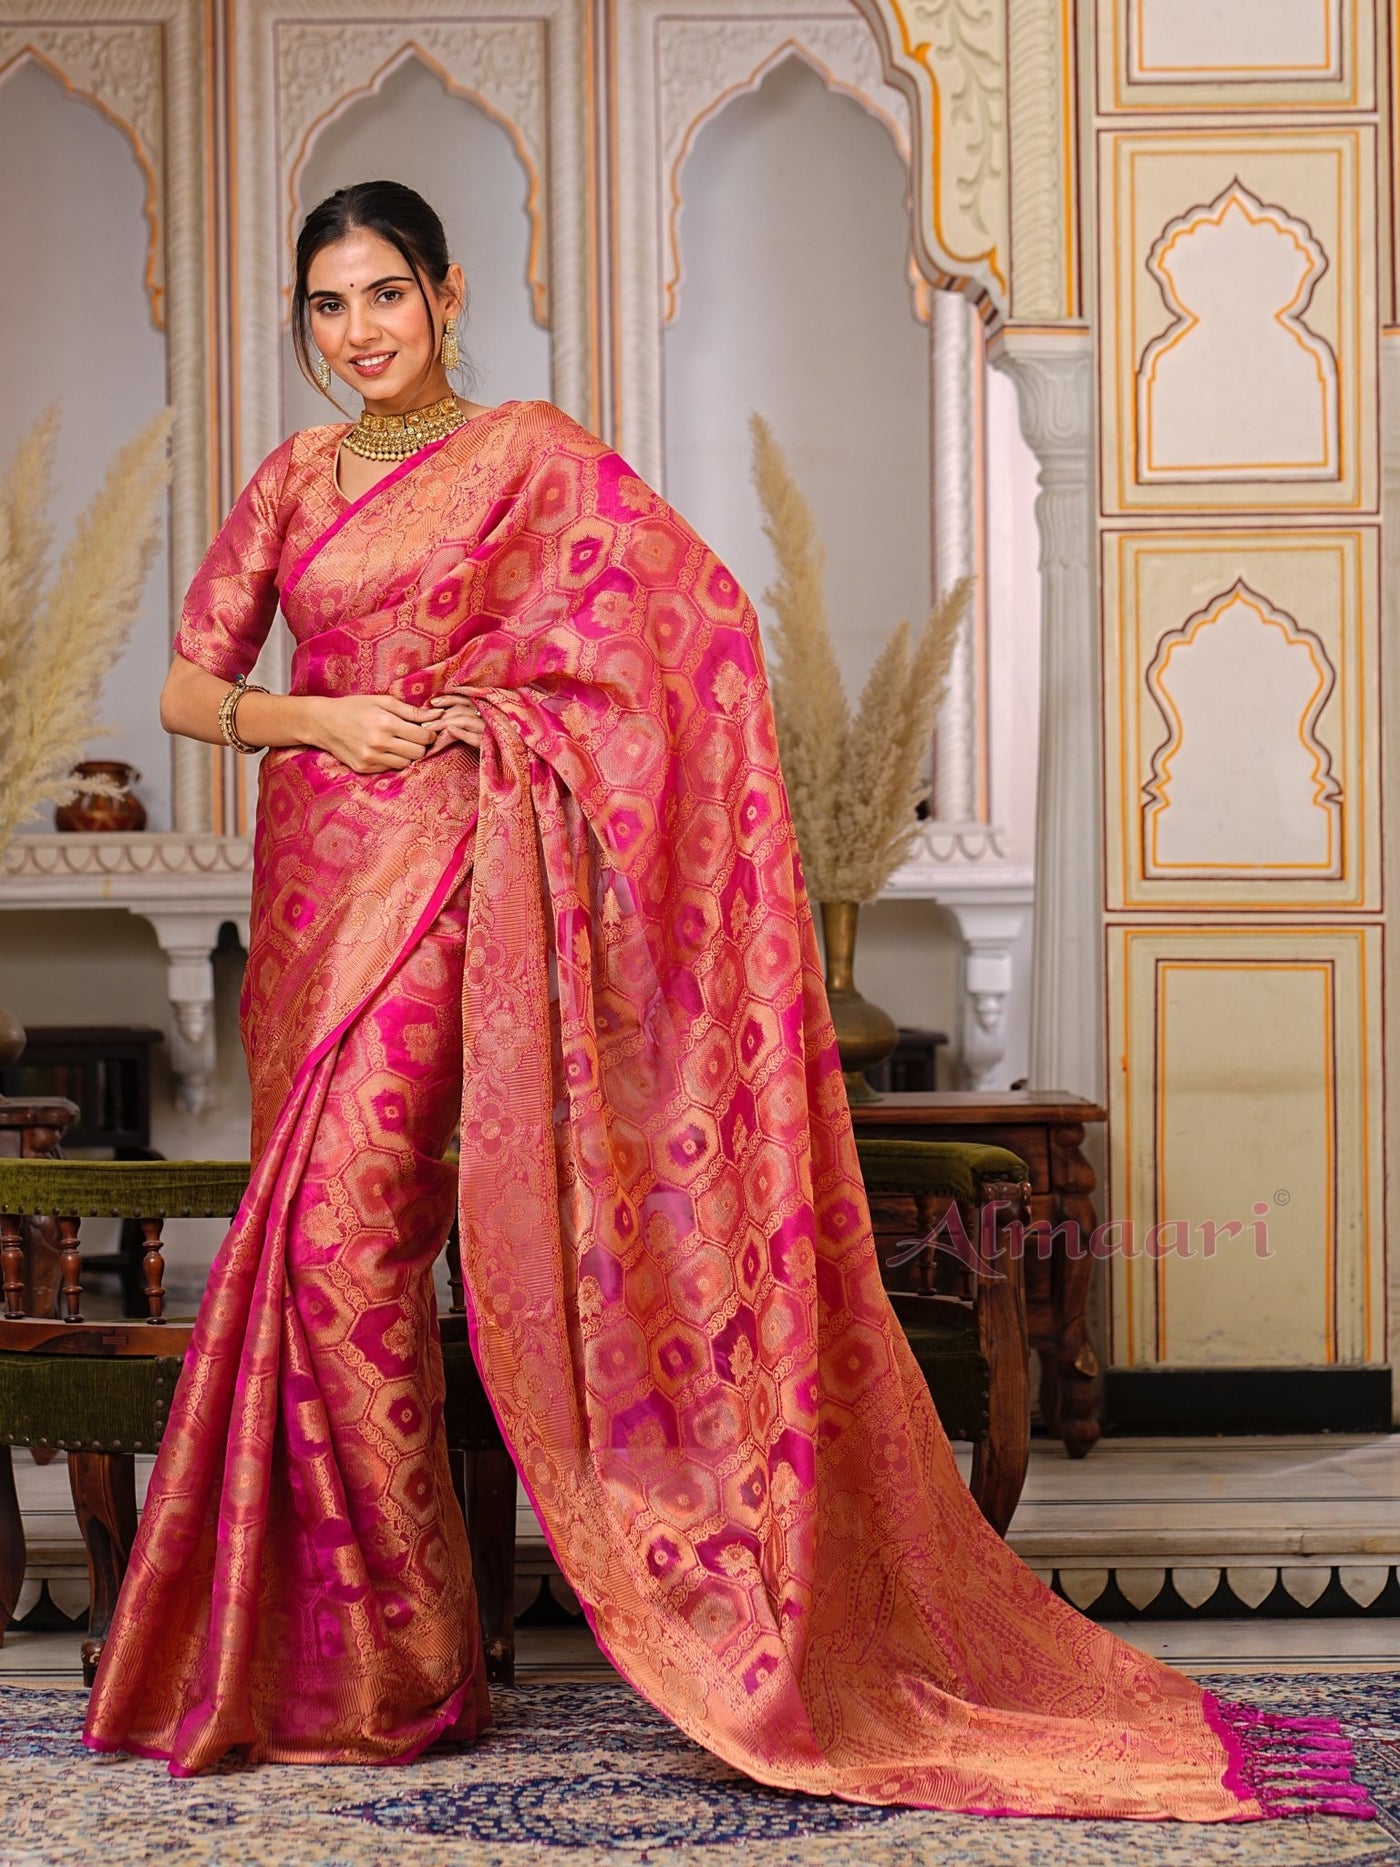 Peach Color Pure Organza Saree Adorned with Zari Weaving, Complete with Matching Blouse Piece - Almaari Fashion